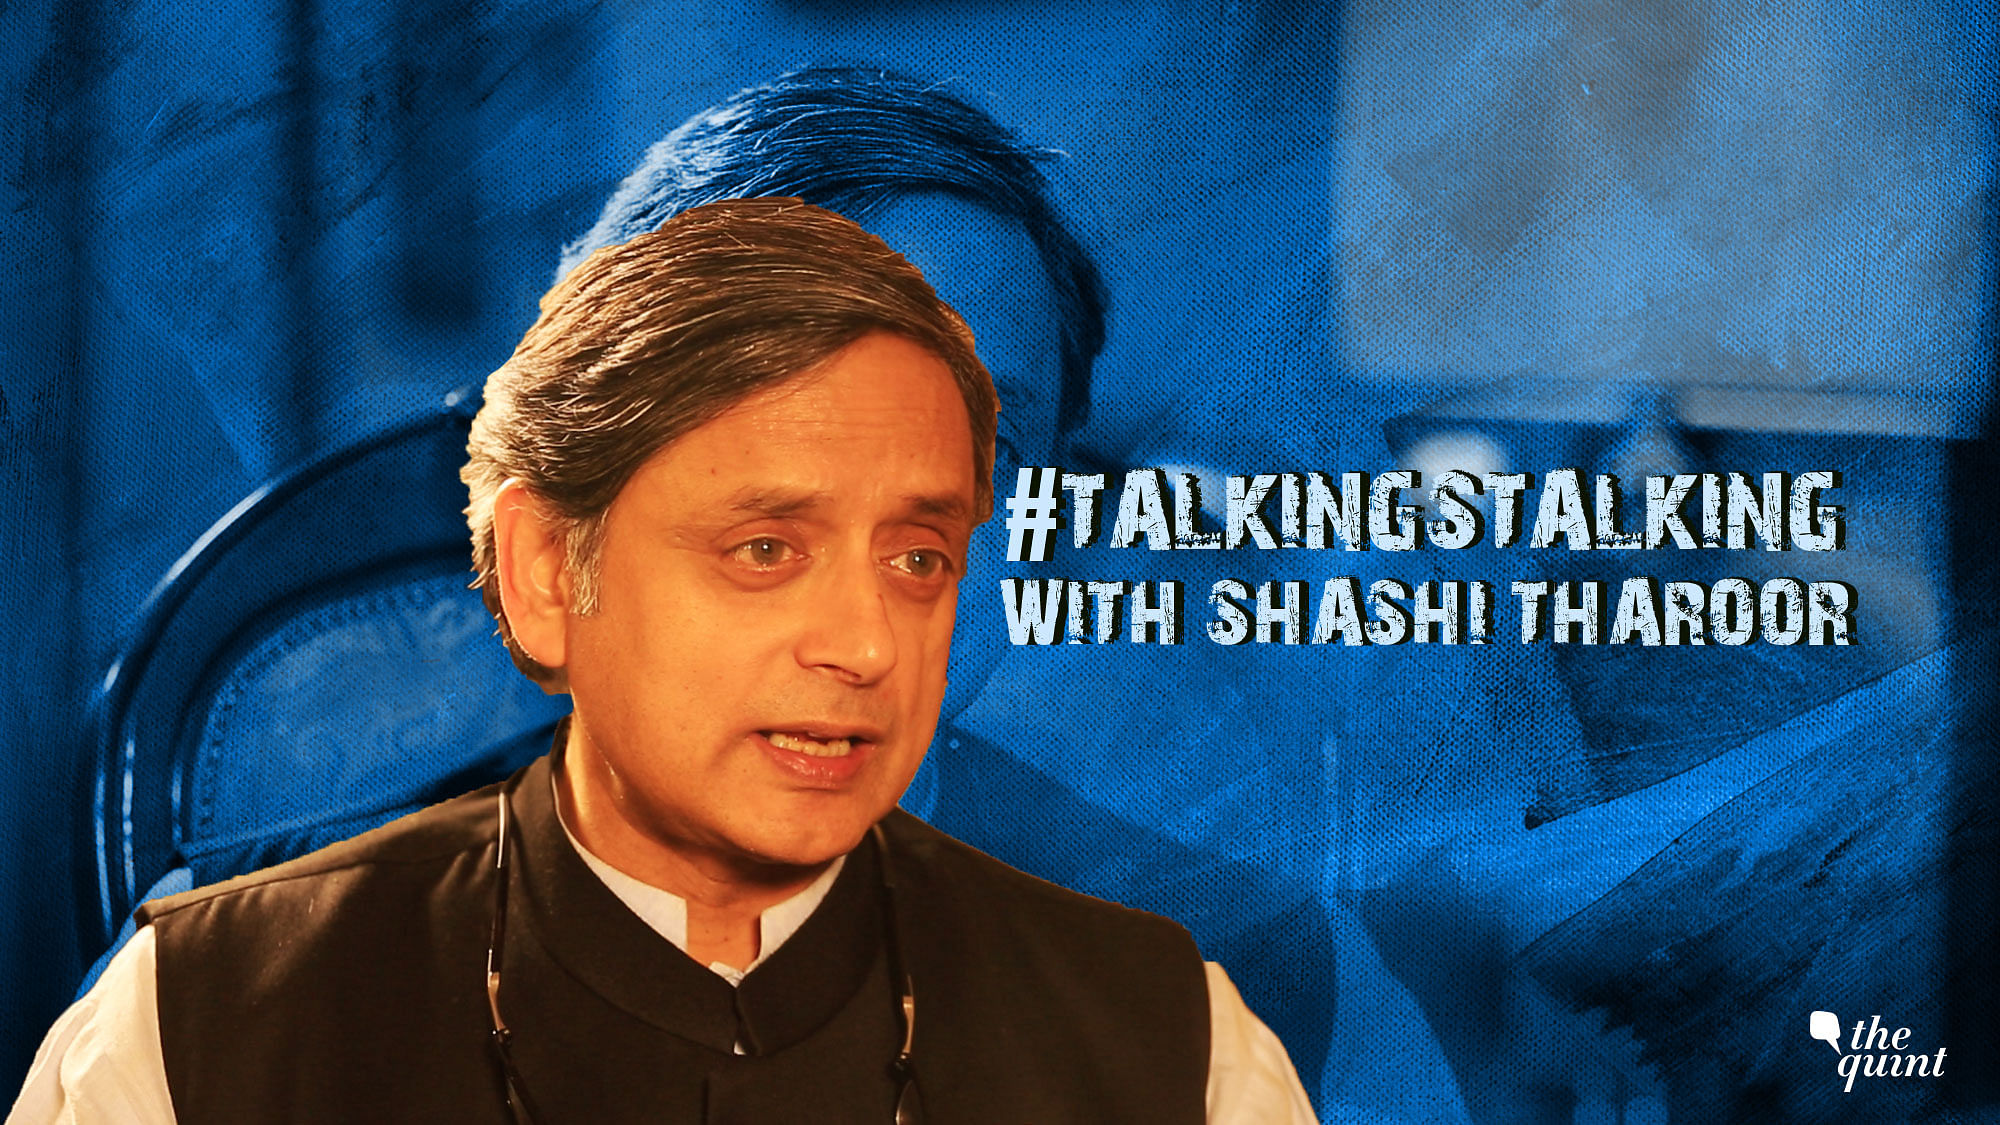 Shashi Tharoor joins the Talking Stalking campaign.